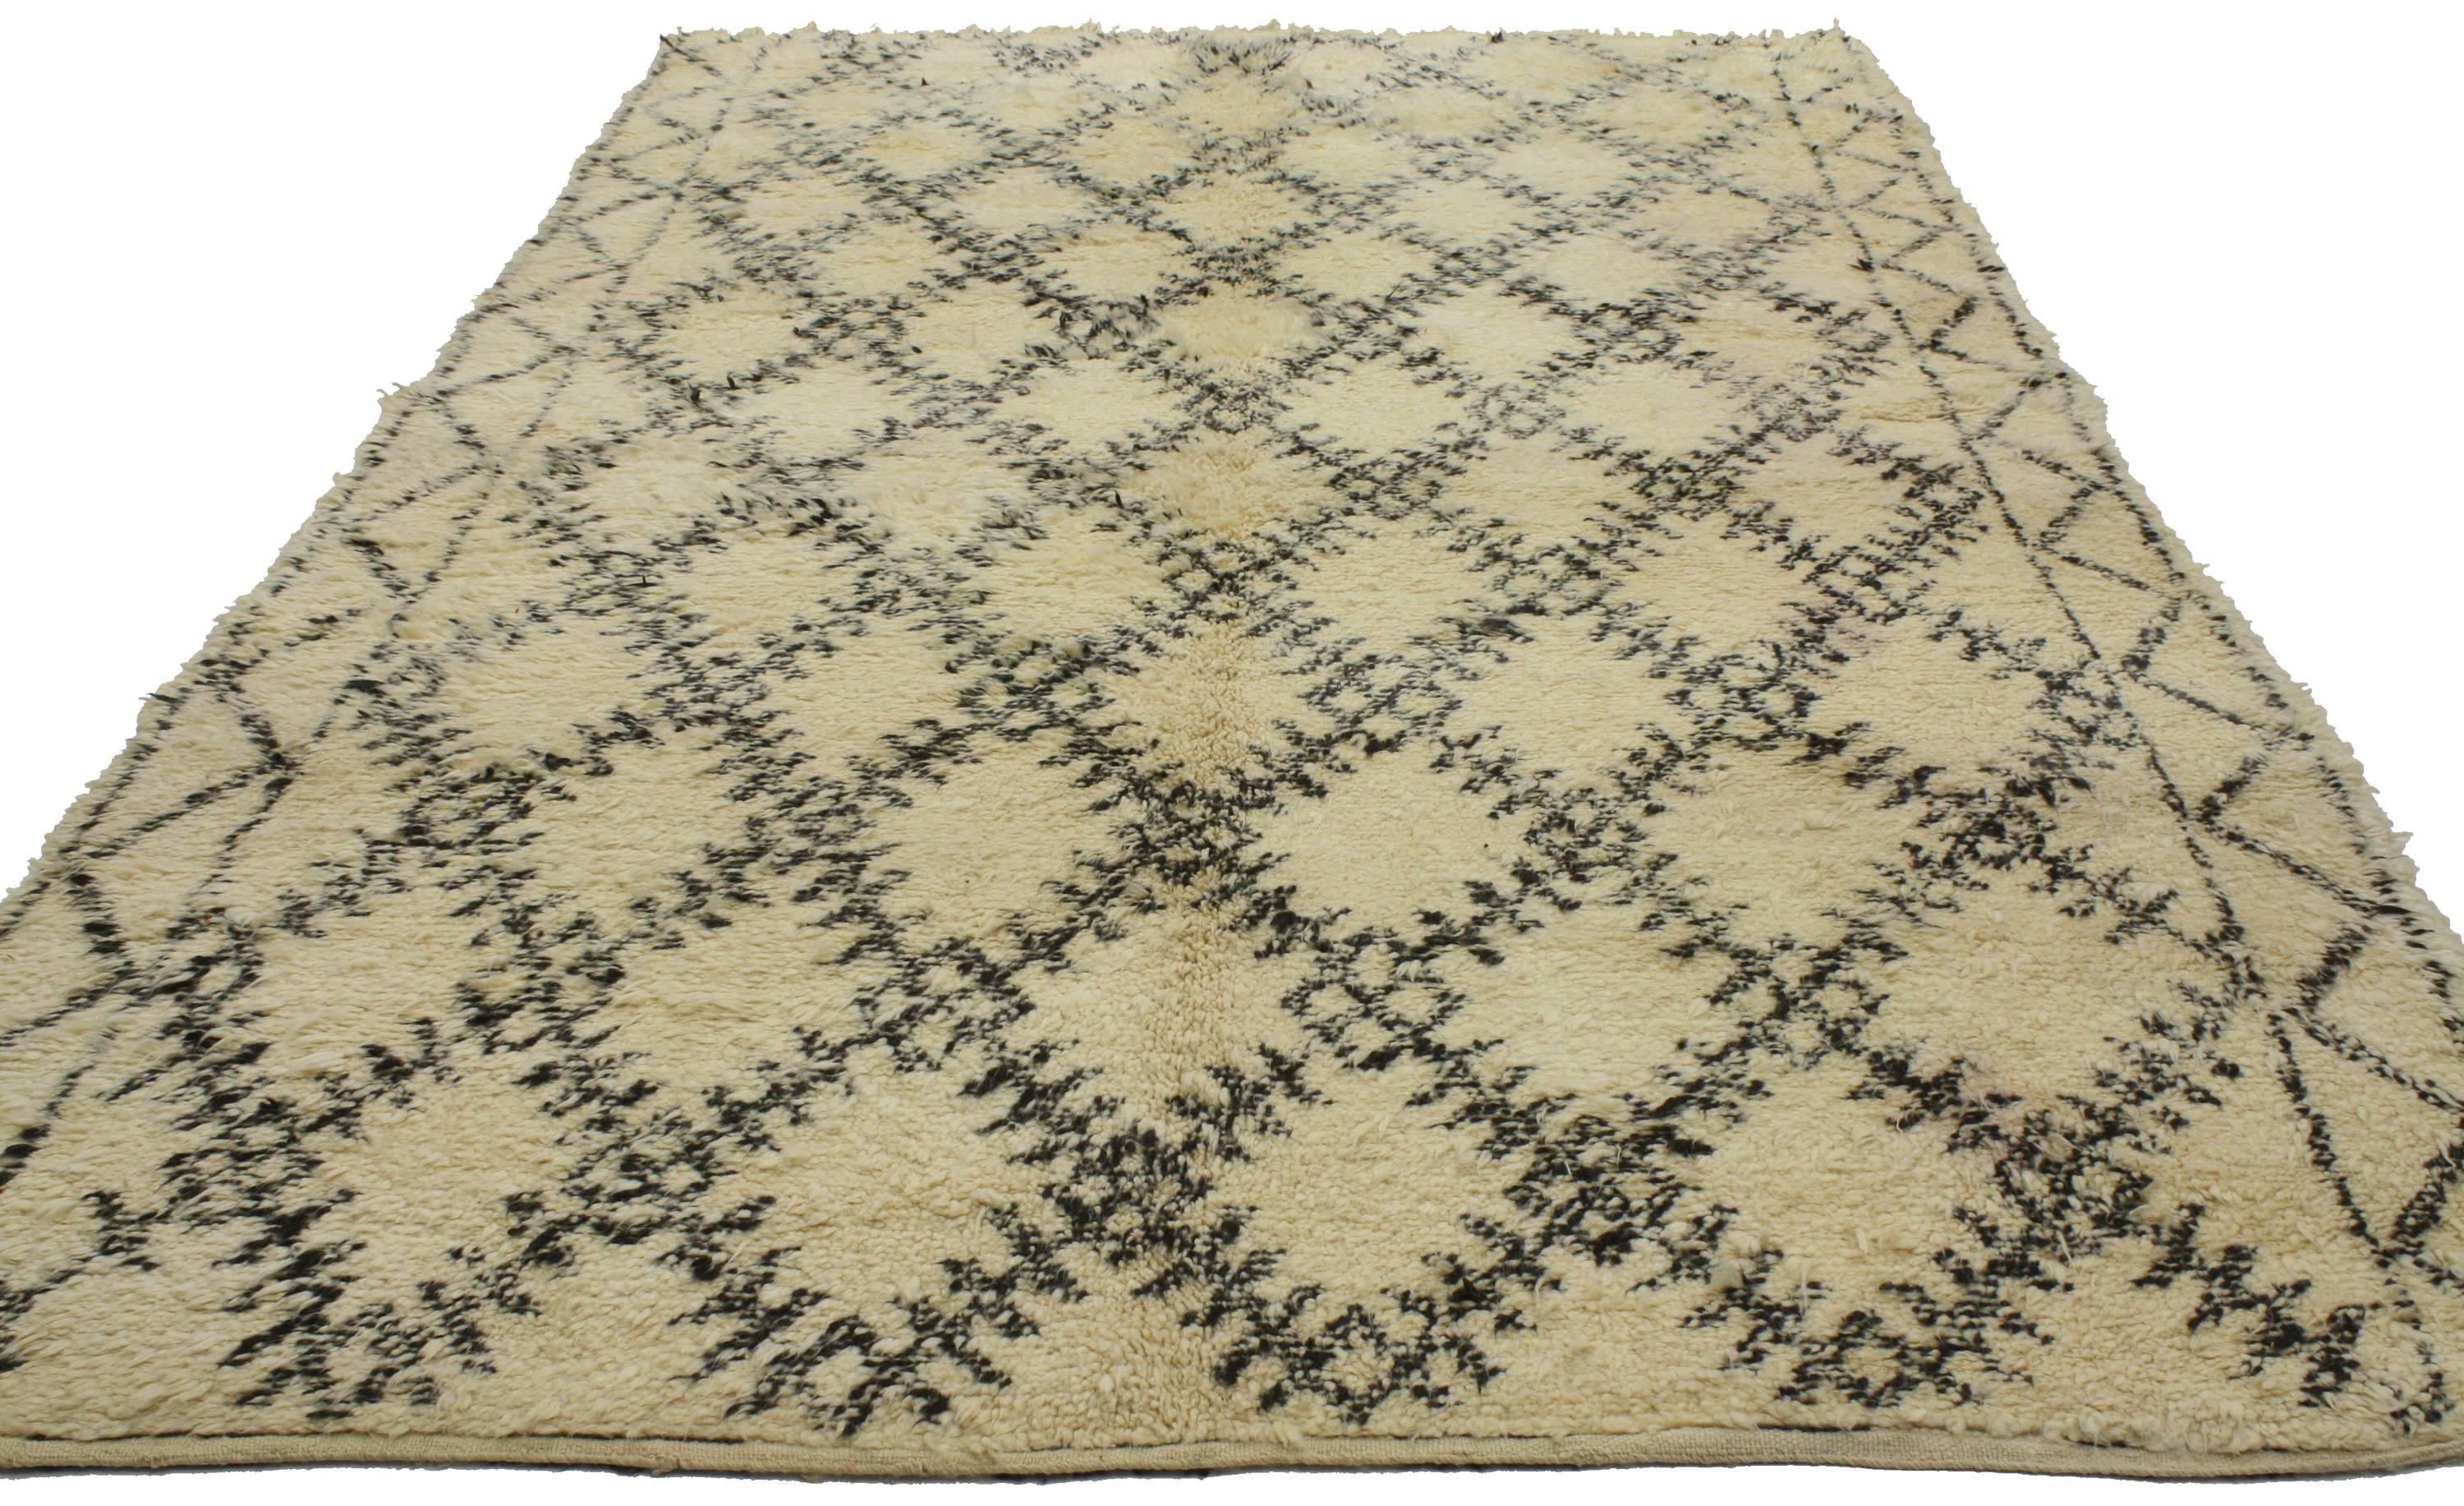 20222 Vintage Beni Ourain Moroccan Rug with Modern Bauhaus Style, Beni Ouarain Rug. This hand knotted wool vintage Moroccan Beni Ouarain rug features an all-over diamond lattice pattern spread across an abrashed creamy-beige field. Bold, thick lines